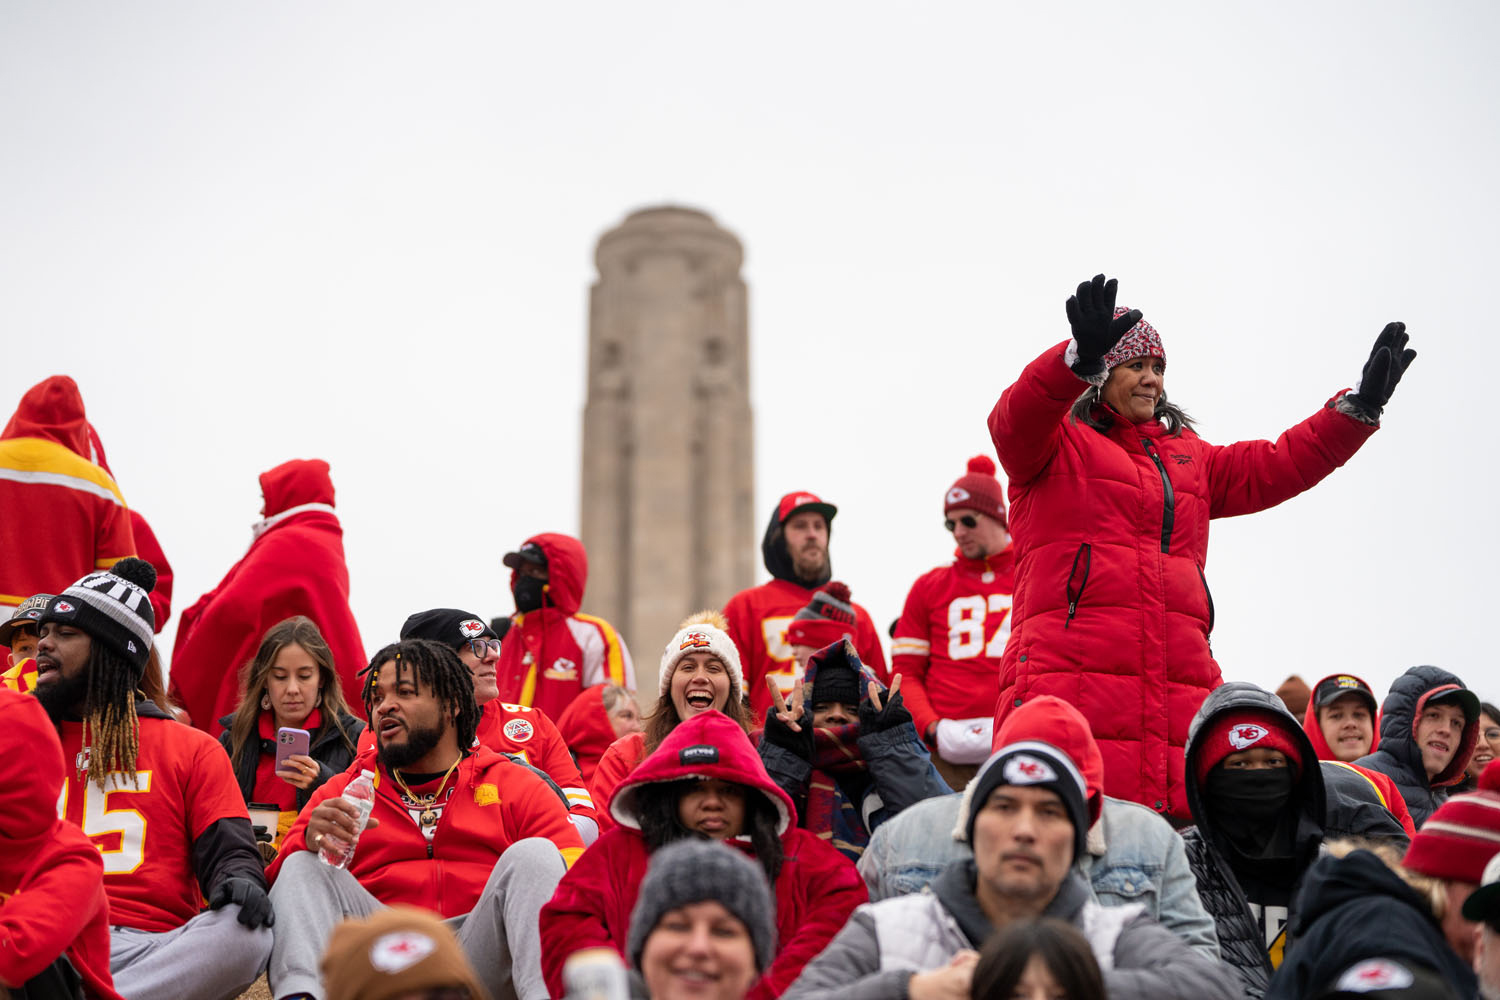 Modern photograph of a crowd of people dressed in red winter clothing. A person in a red puffy coat is standing up with her arms raised. The Liberty Memorial Tower is in the background.